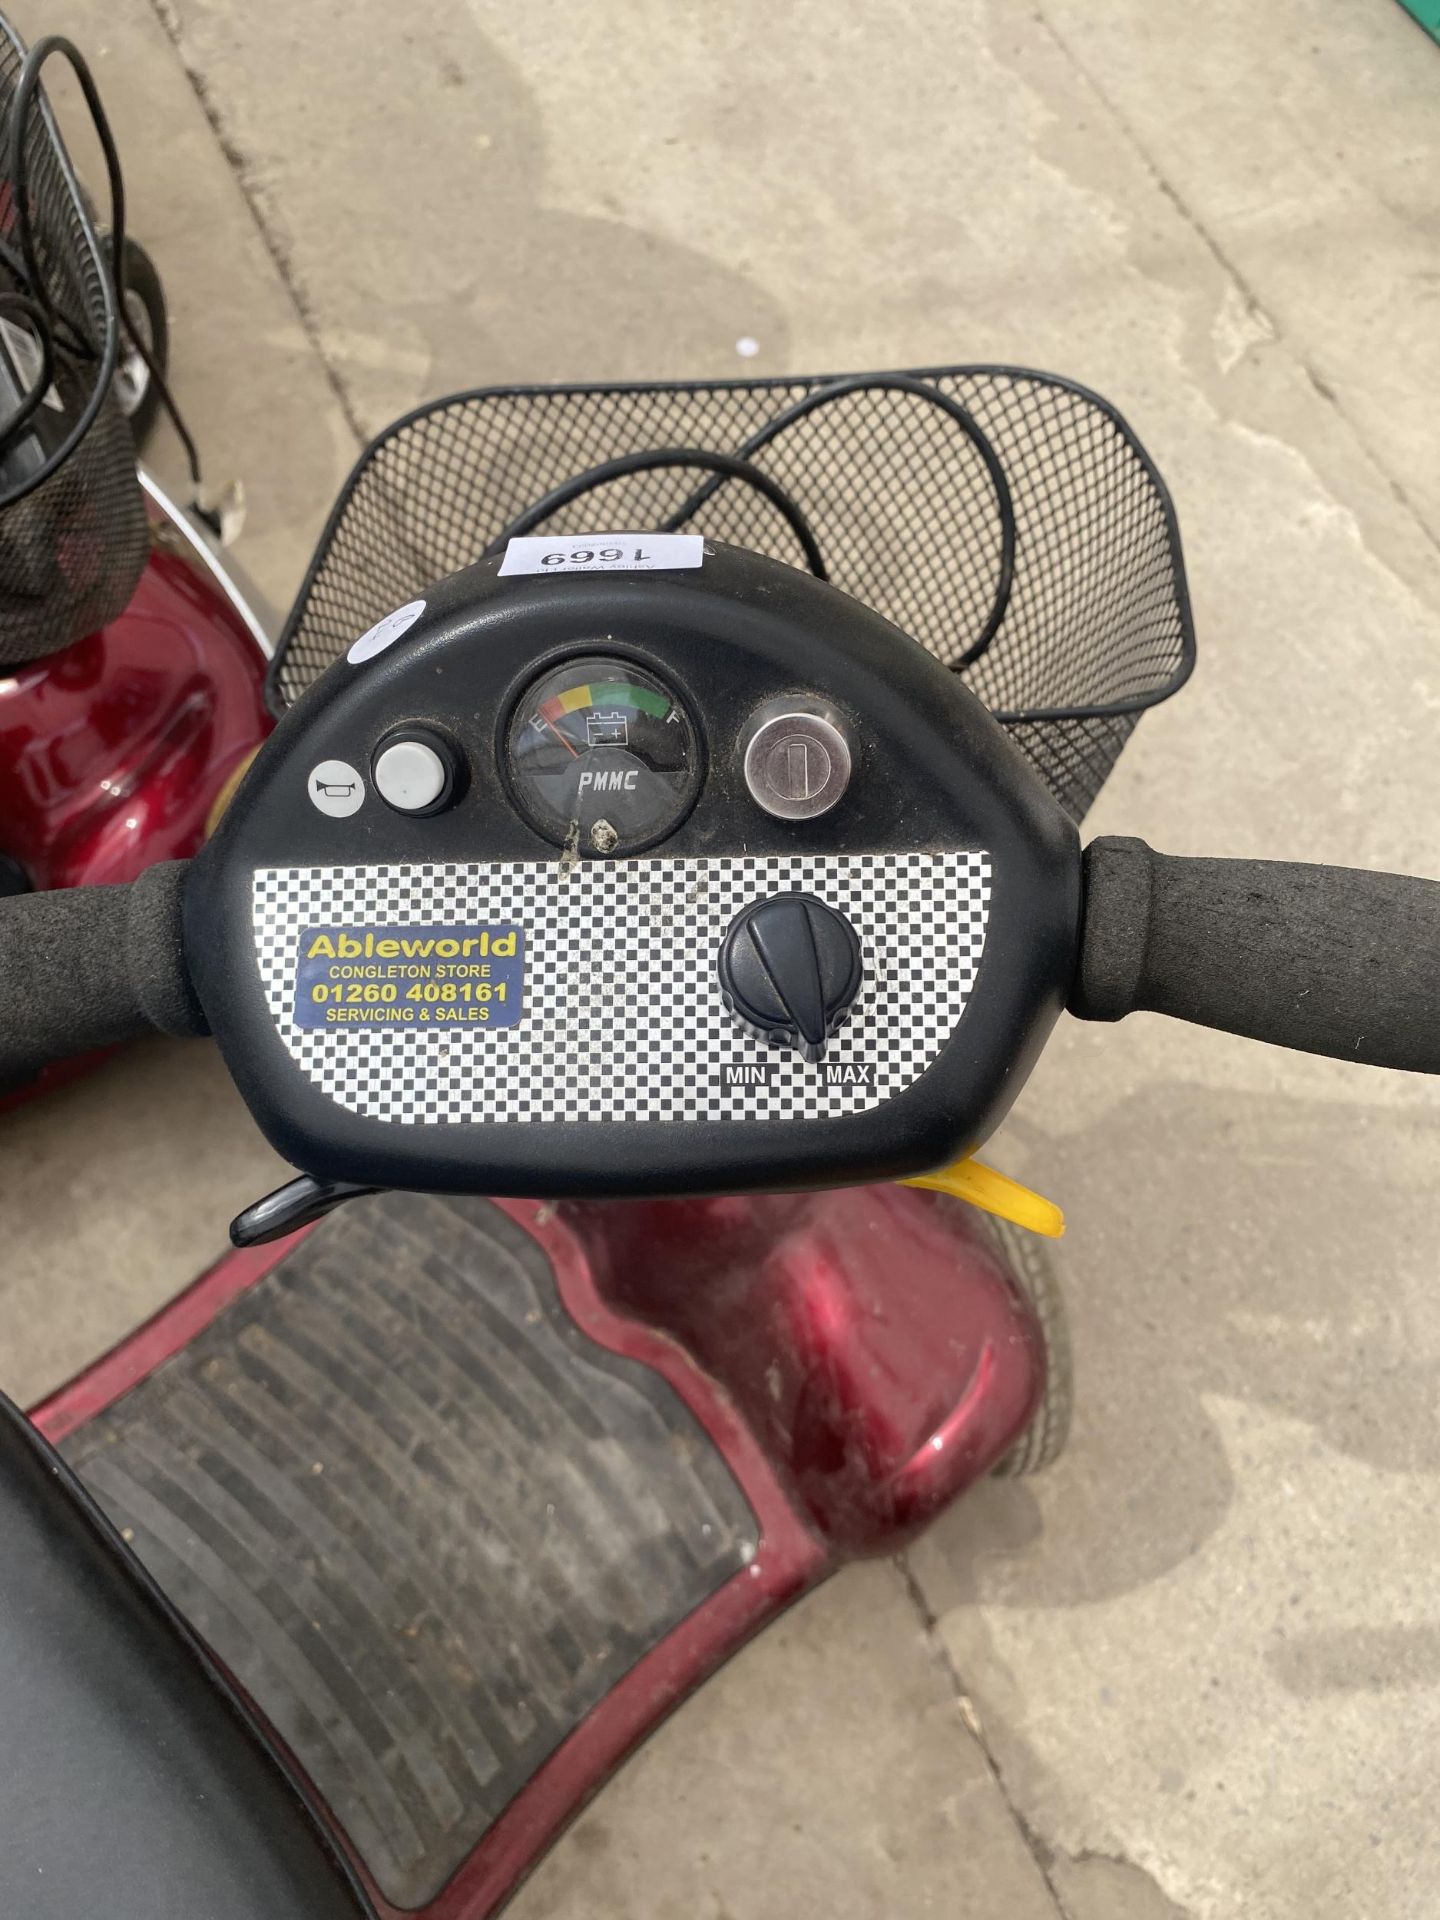 A STERLING PEARL MOBILITY SCOOTER WITH KEY AND CHARGER (VENDOR STATES THERE IS A BAD CONNECTION - Image 3 of 4